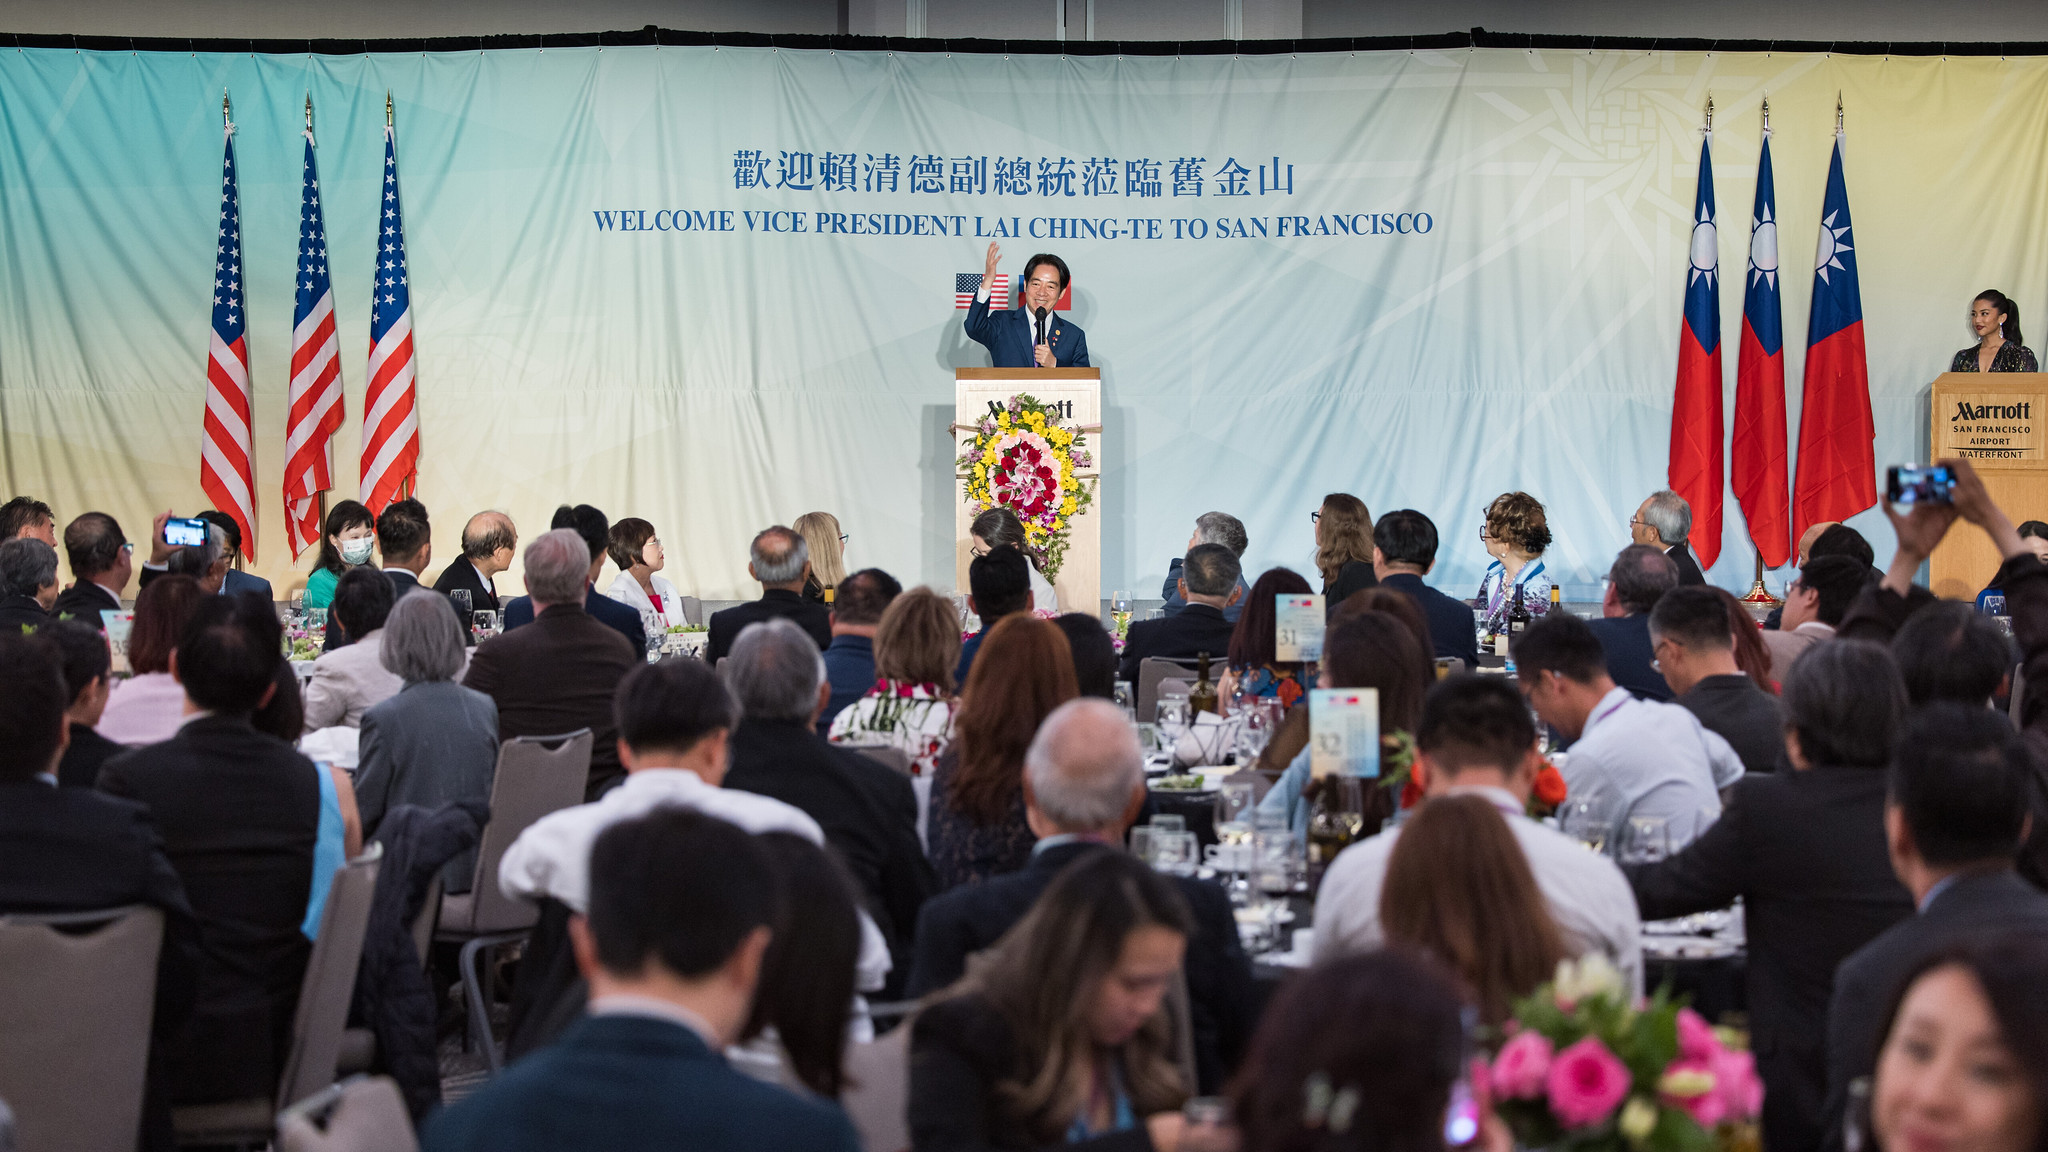 Taiwan’s Vice President Lai Ching-Te attends a banquet with members of the local and Taiwanese overseas communities in San Francisco, United States on 17 August 2023. © Shufu Liu / Office of the President via Flickr.